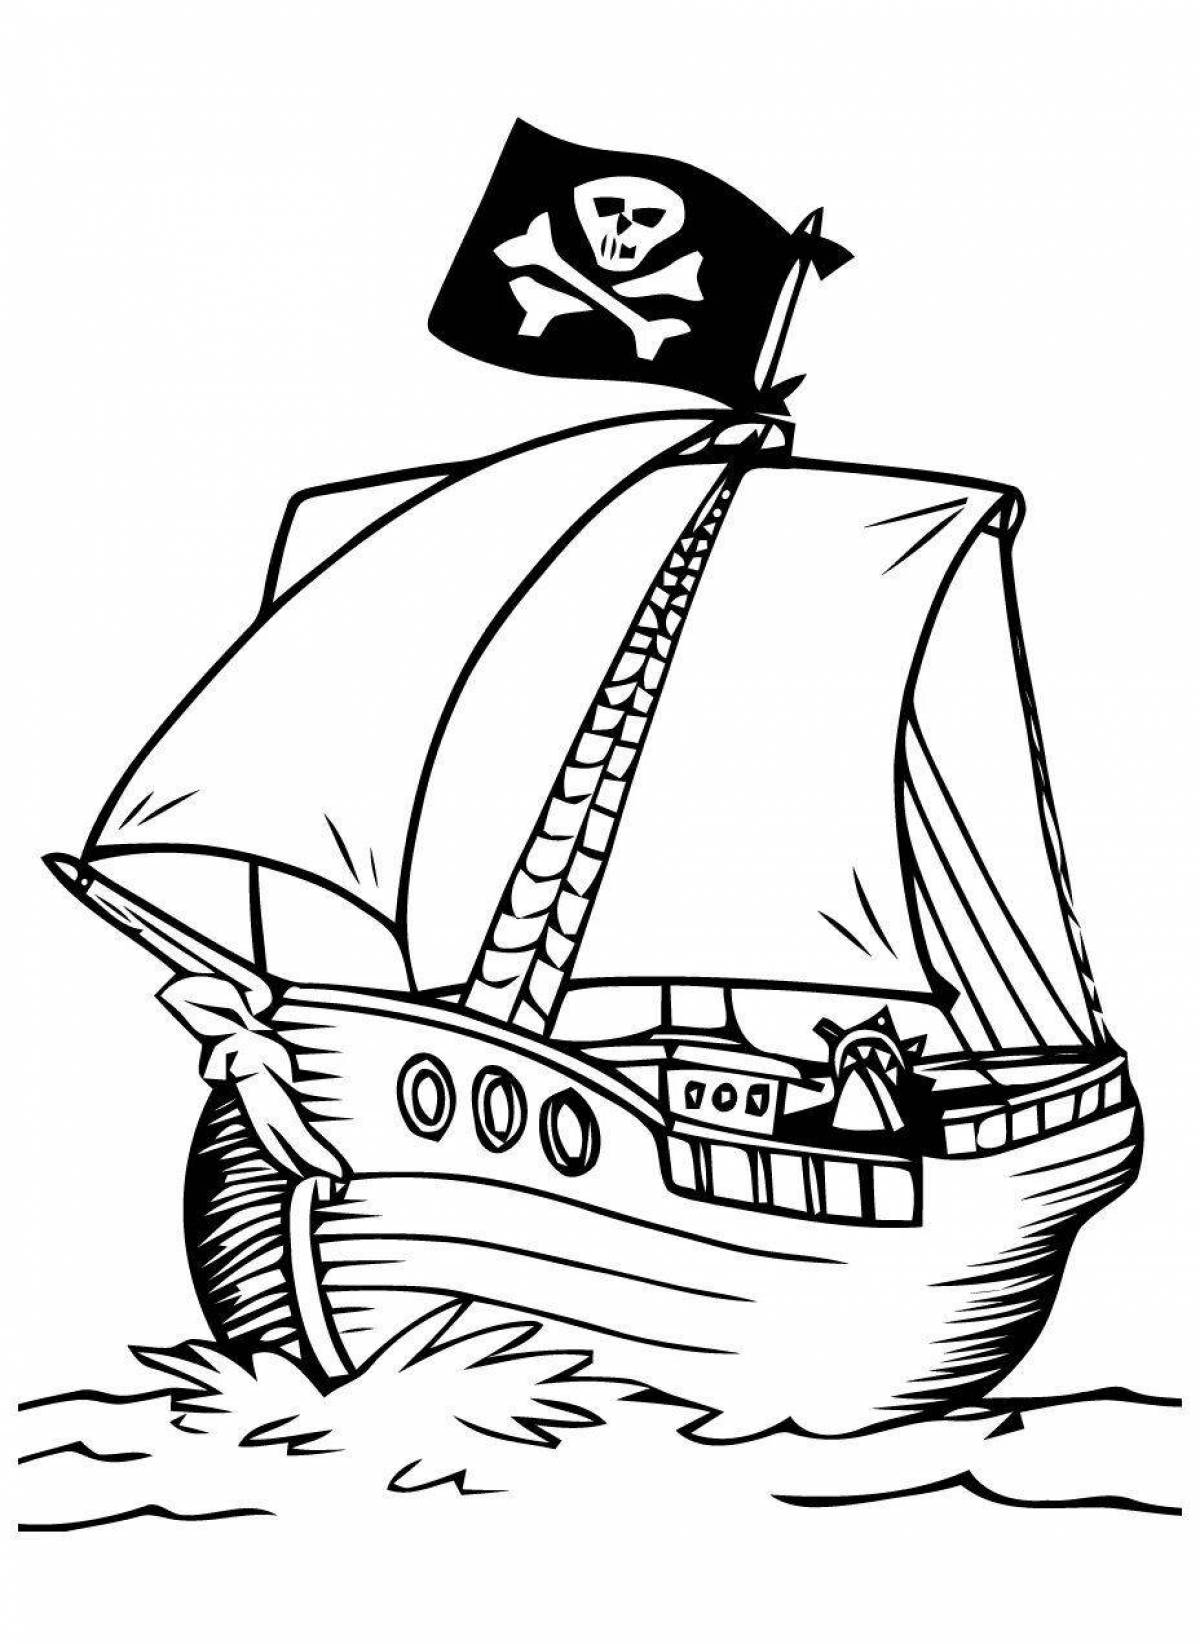 Funny pirate ship coloring book for kids